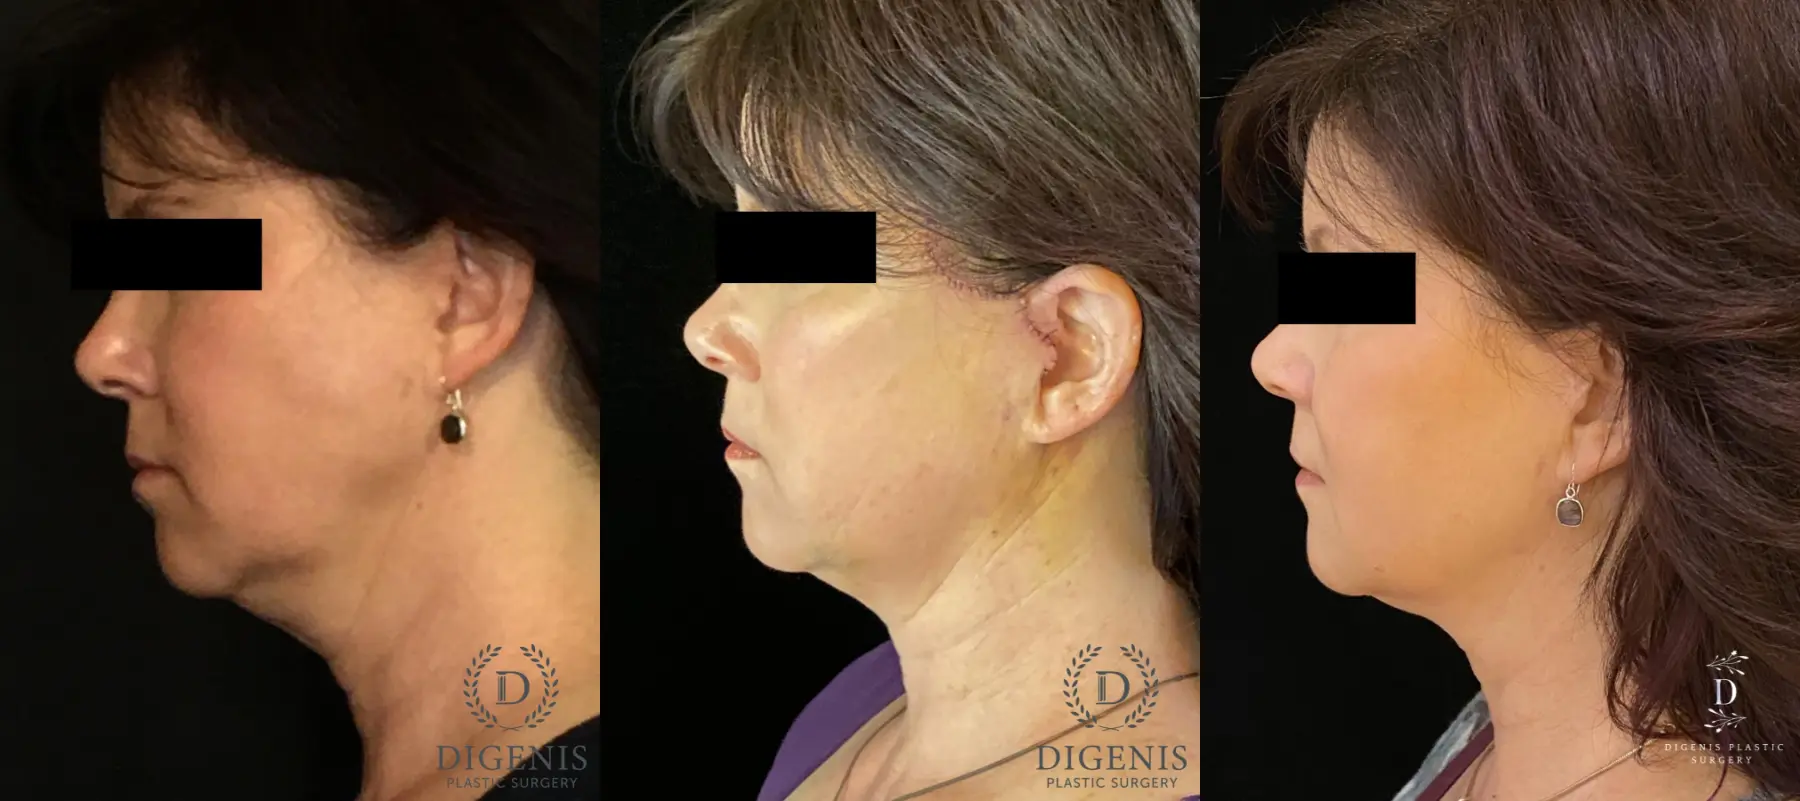 Digenis Refresh Lift: Patient 4 - Before and After 5